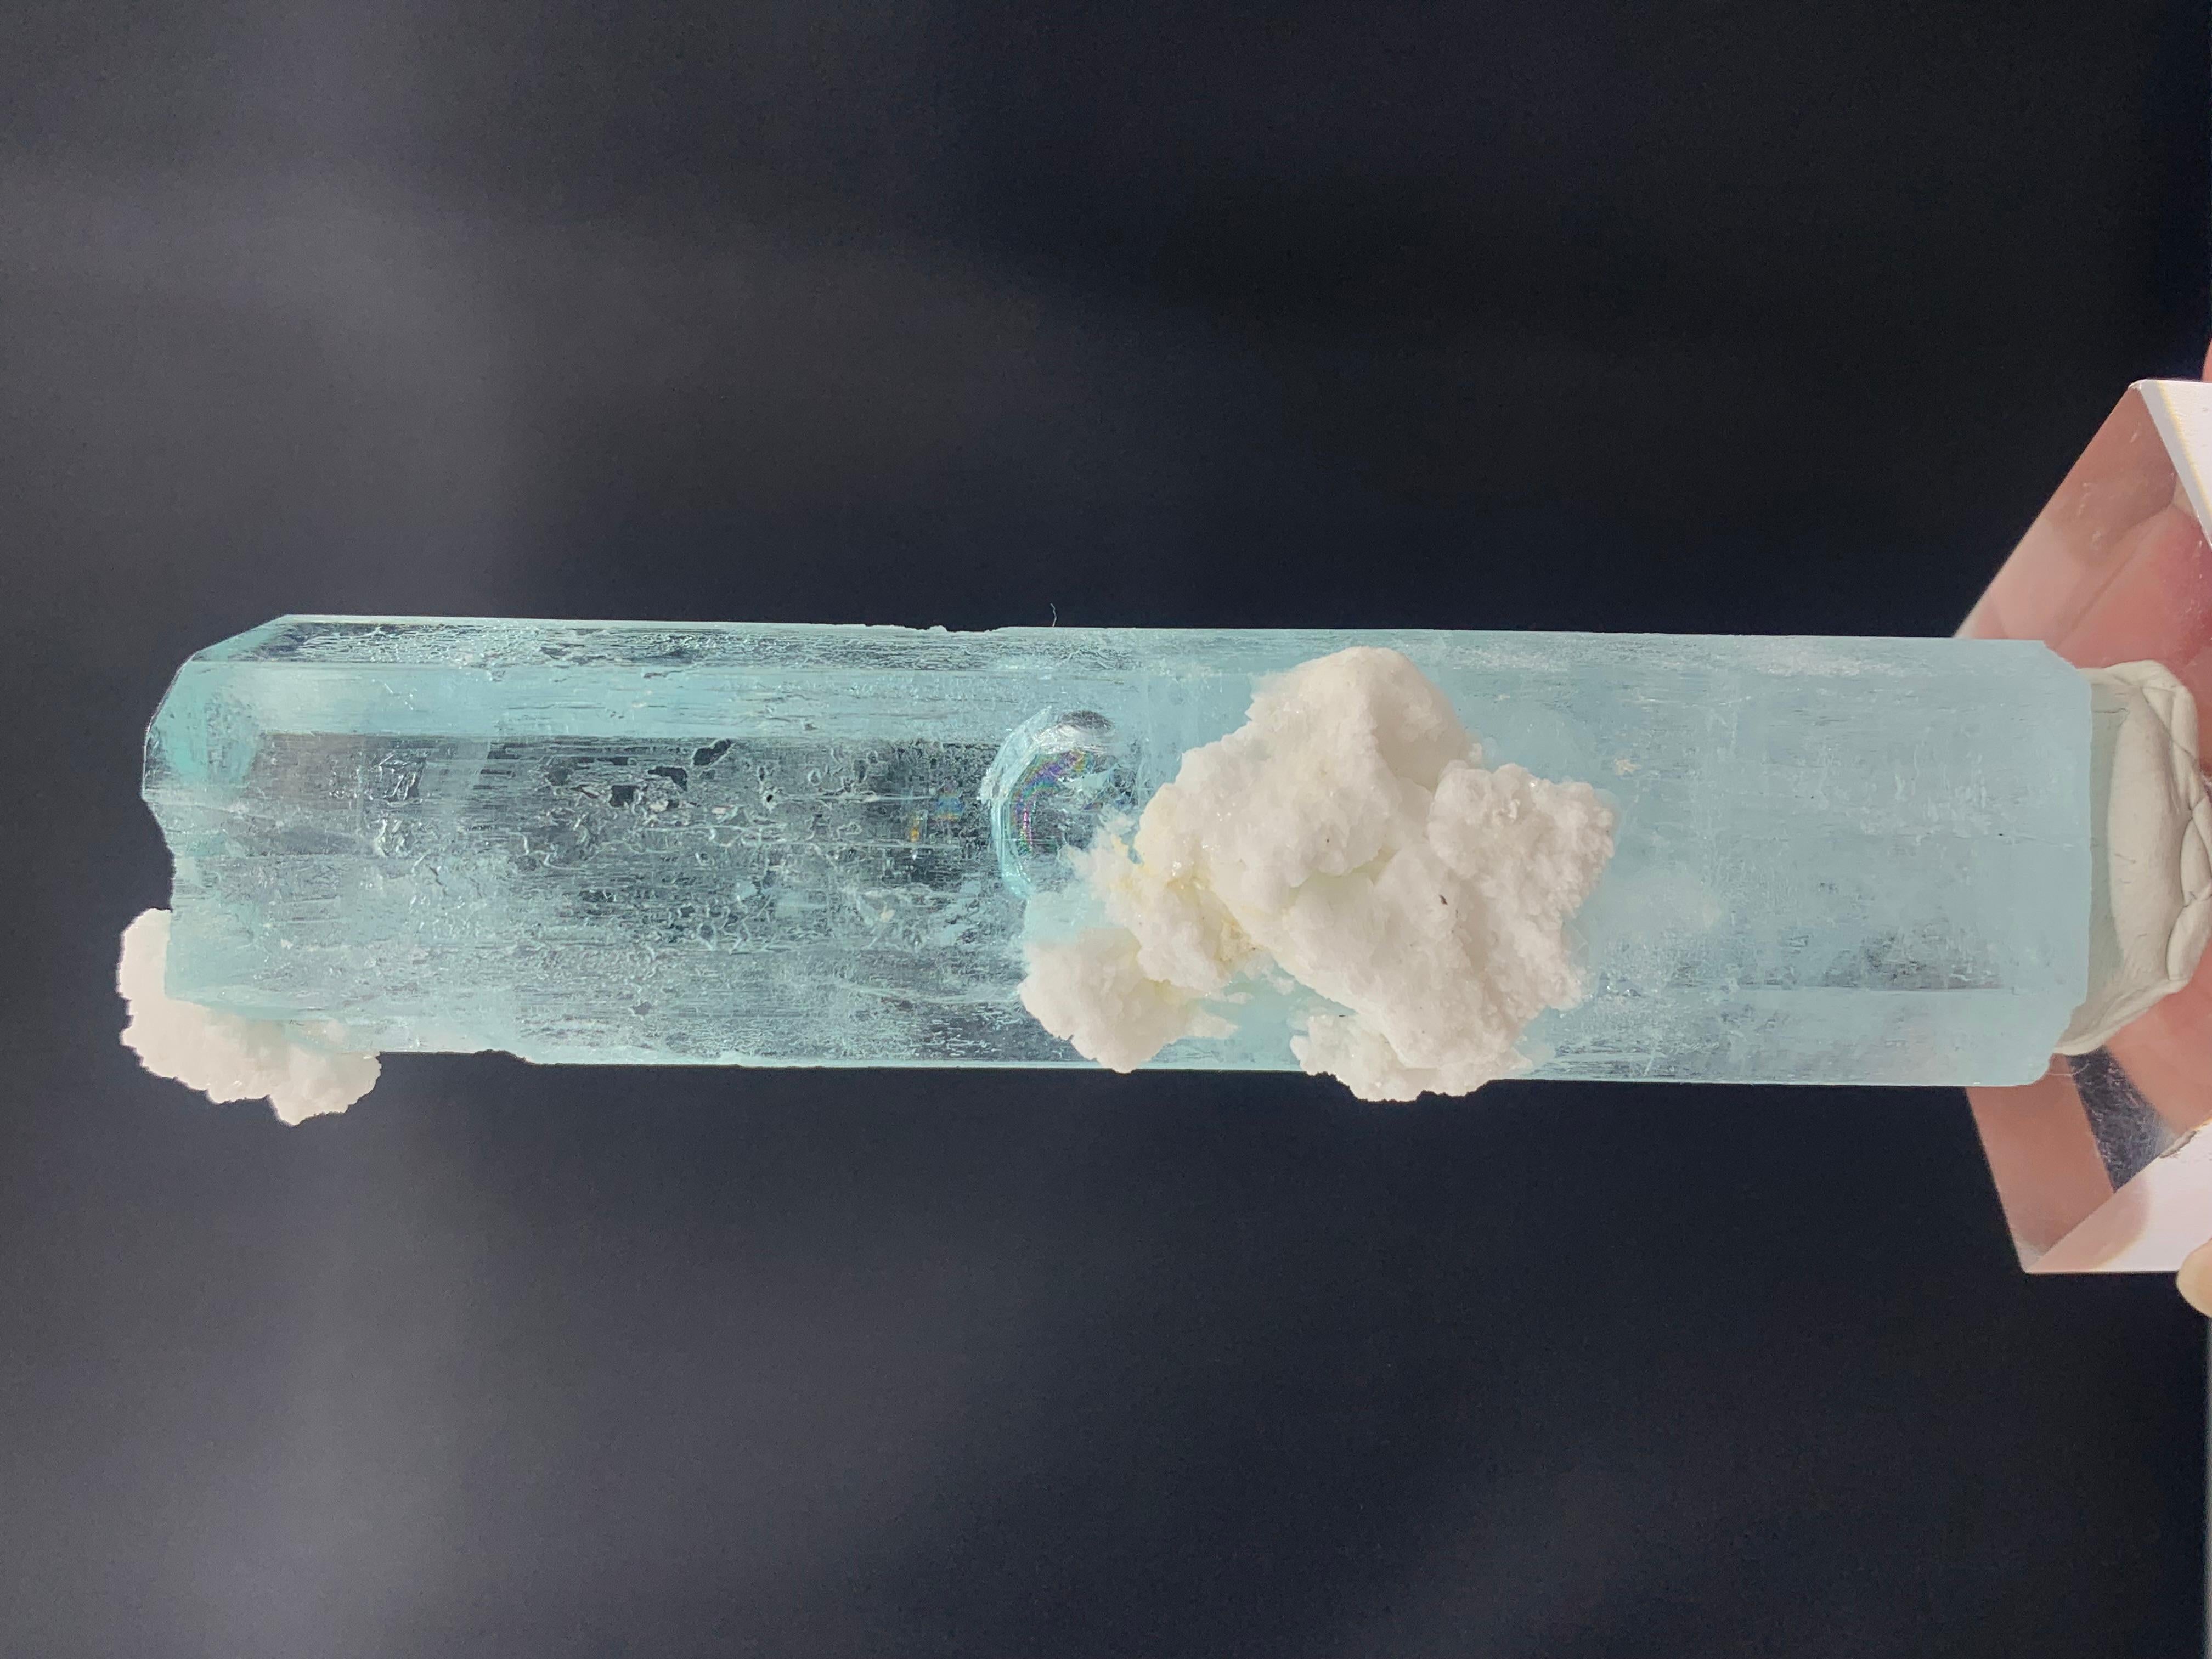 Glamorous Aquamarine Specimen From Nagar Valley Gilgit, Pakistan 
WEIGHT: 110 gram
DIMENSIONS: 10.9 x2.5 x 1.8 Cm
ORIGIN: Nagar Valley, Gilgit Baltistan Pakistan 
TREATMENT: None
Aquamarine is a pale-blue to light-green variety of beryl. The